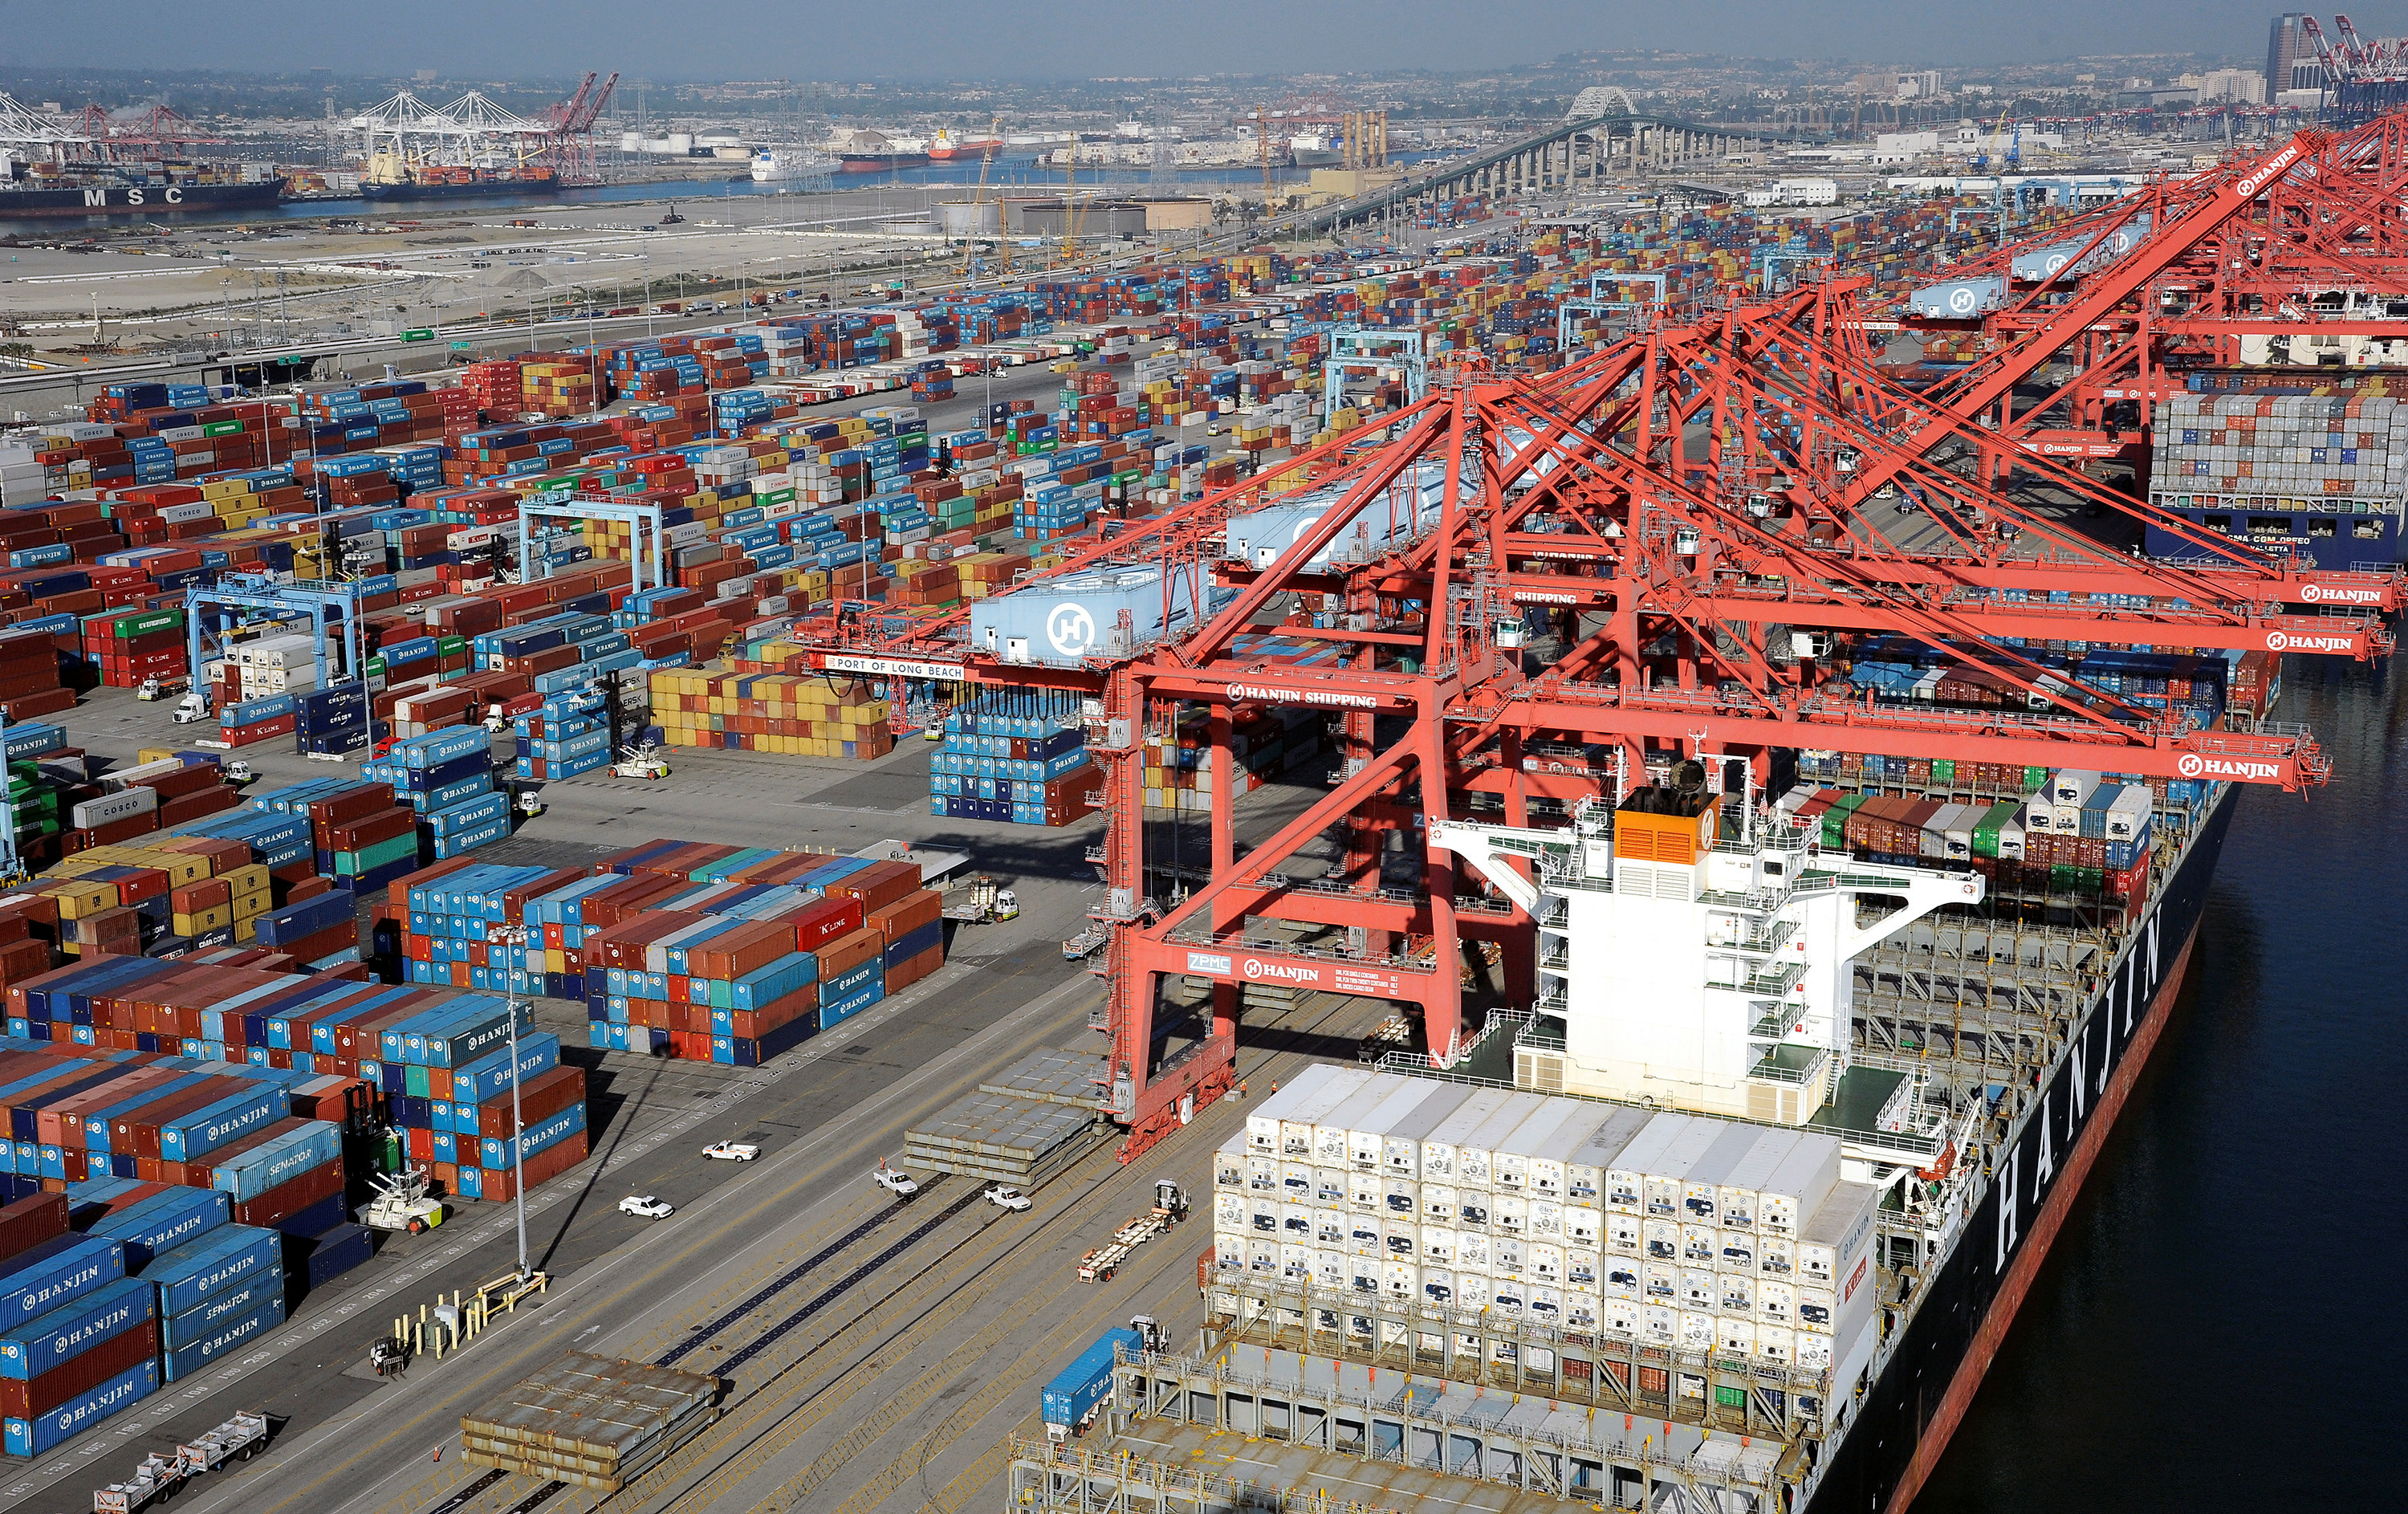 Cranes and containers are seen at the Ports of Los Angeles and Long Beach, California in this aerial image